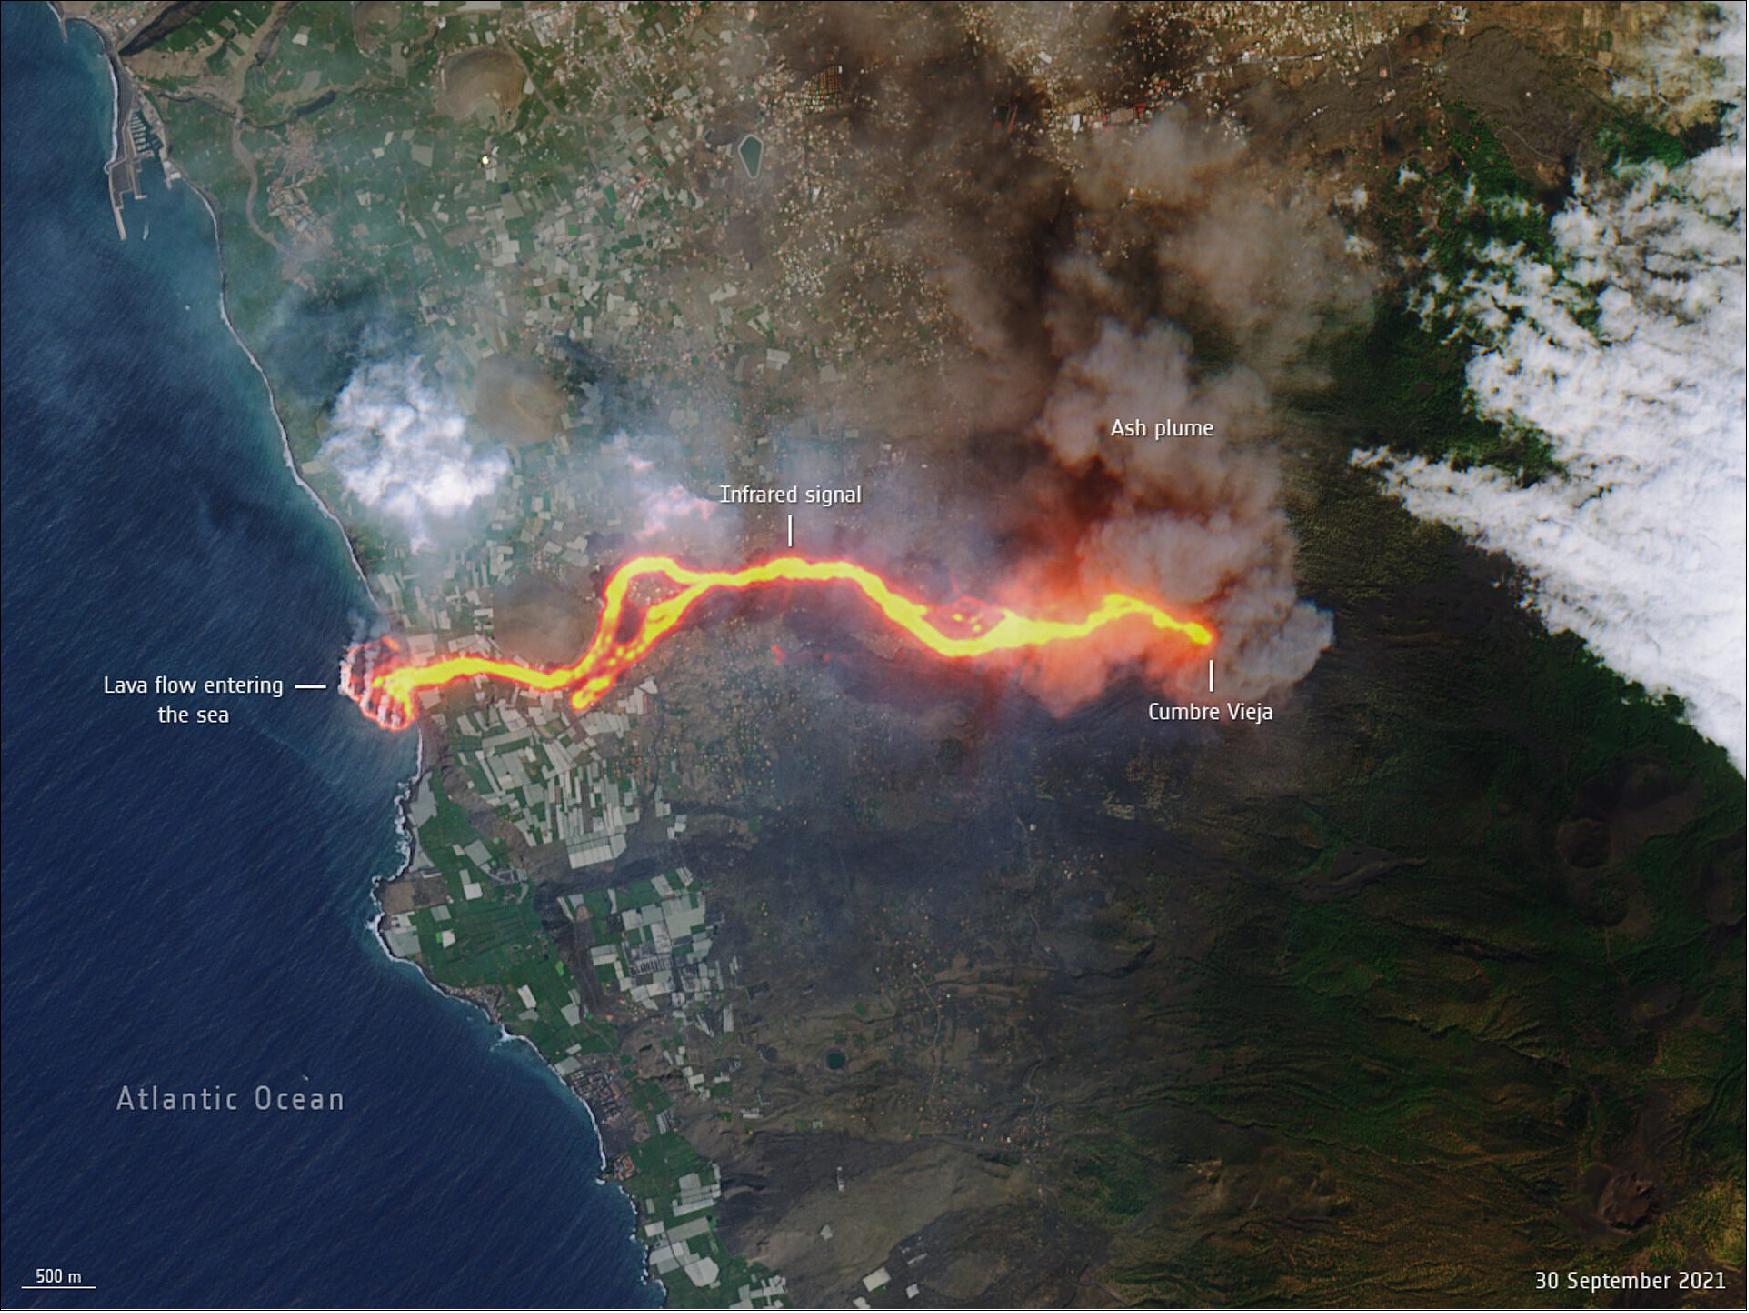 Figure 18: This image, captured by the Copernicus Sentinel-2 mission on 30 September, shows the flow of lava from the volcano erupting on the Spanish island of La Palma. The cascade of lava can be seen spilling into the Atlantic Ocean, extending the size of the coastline. This ‘lava delta’ covered about 20 hectares when the image was taken (image credit: ESA, the image contains modified Copernicus Sentinel data (2021), processed by ESA, CC BY-SA 3.0 IGO)